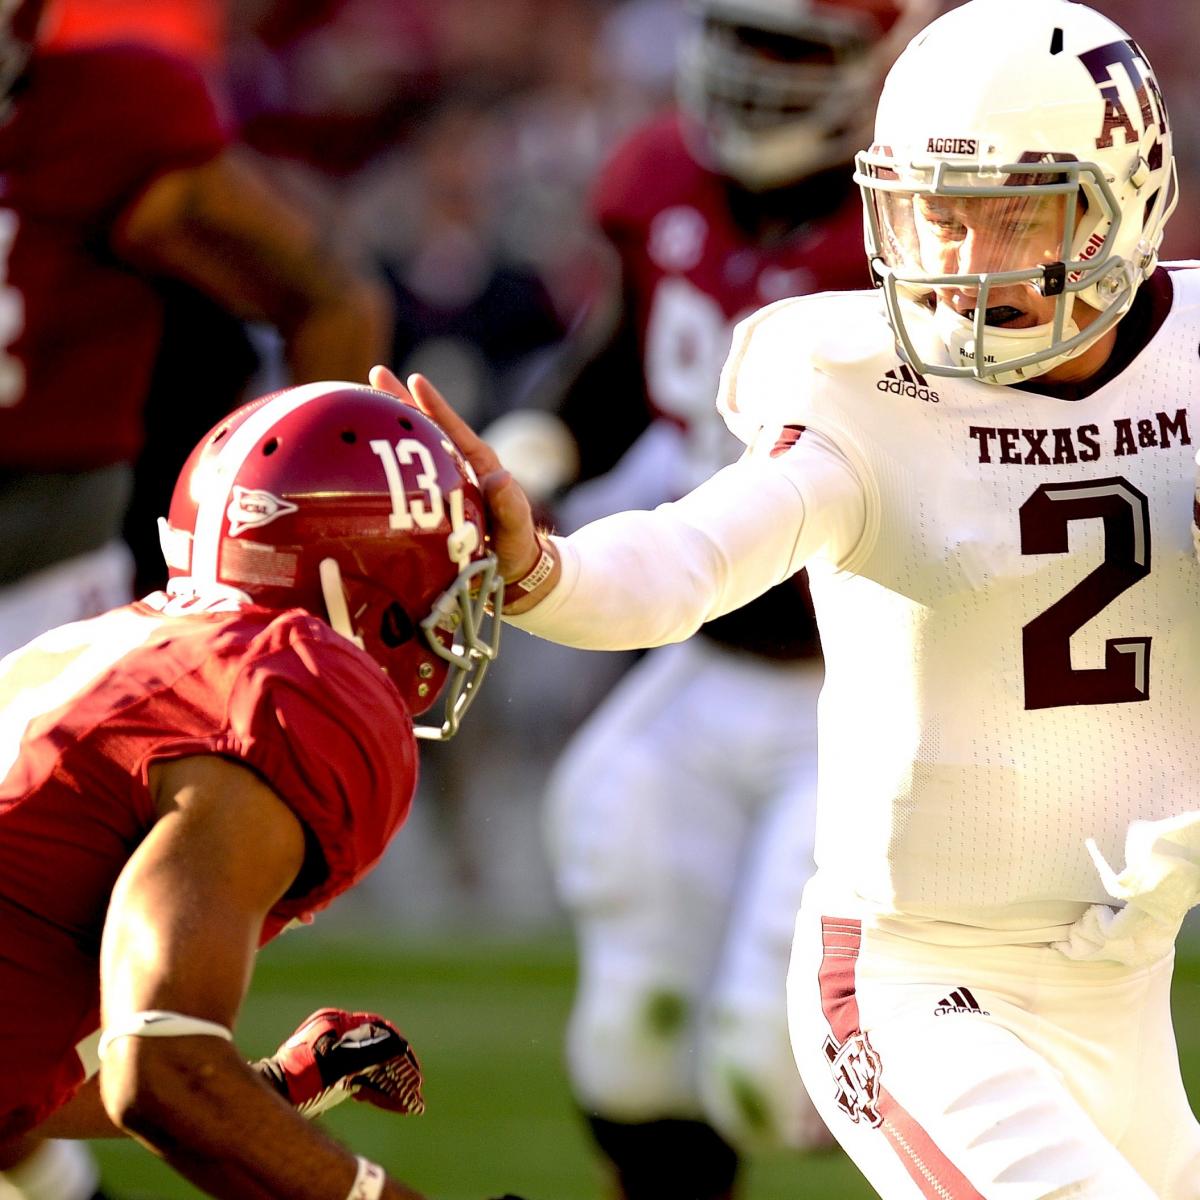 Texas A&M vs. Alabama: Live Scores, Analysis and Results | Bleacher